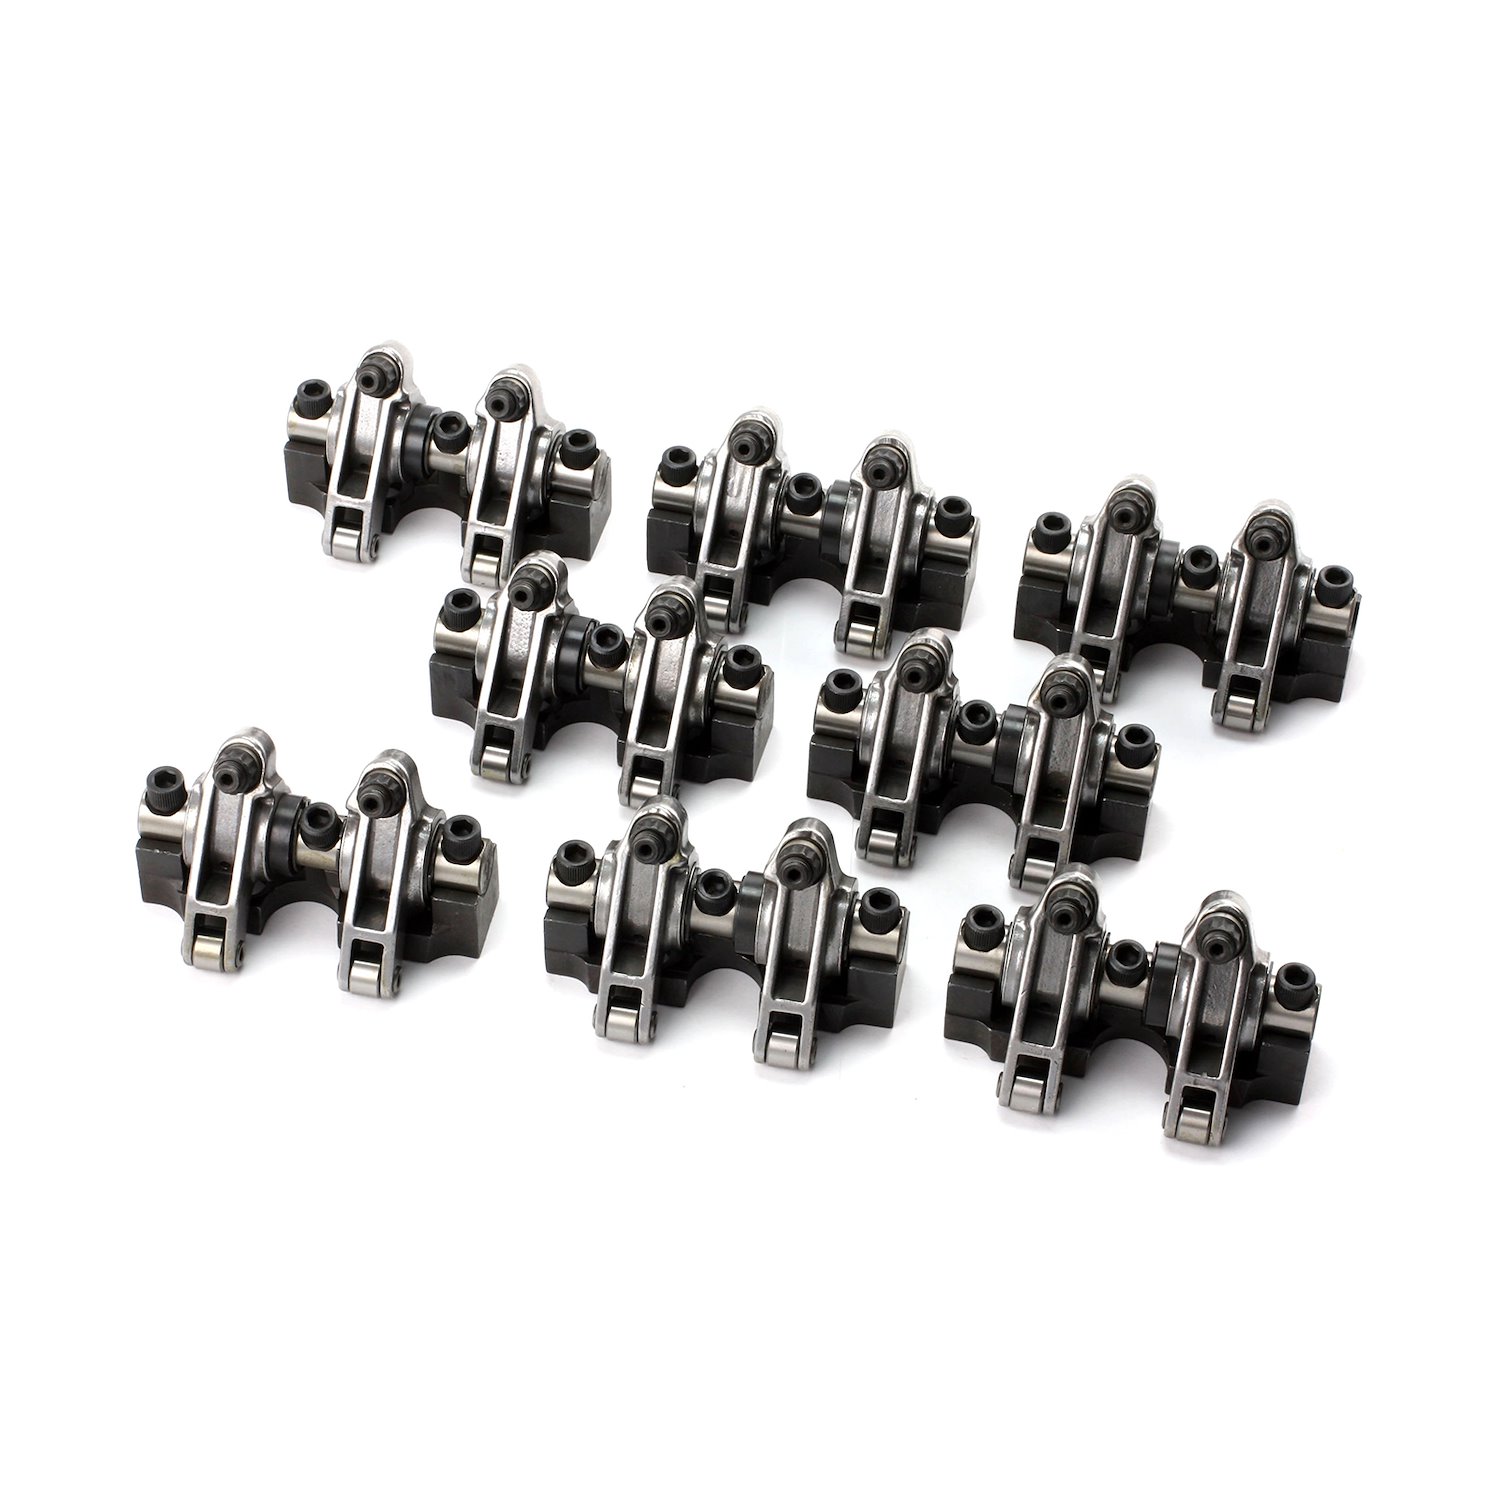 SB CHEV 1.6 - 0.100 OFFSET STAINLESS STEEL SHAFT MOUNT ROLLER ROCKERS